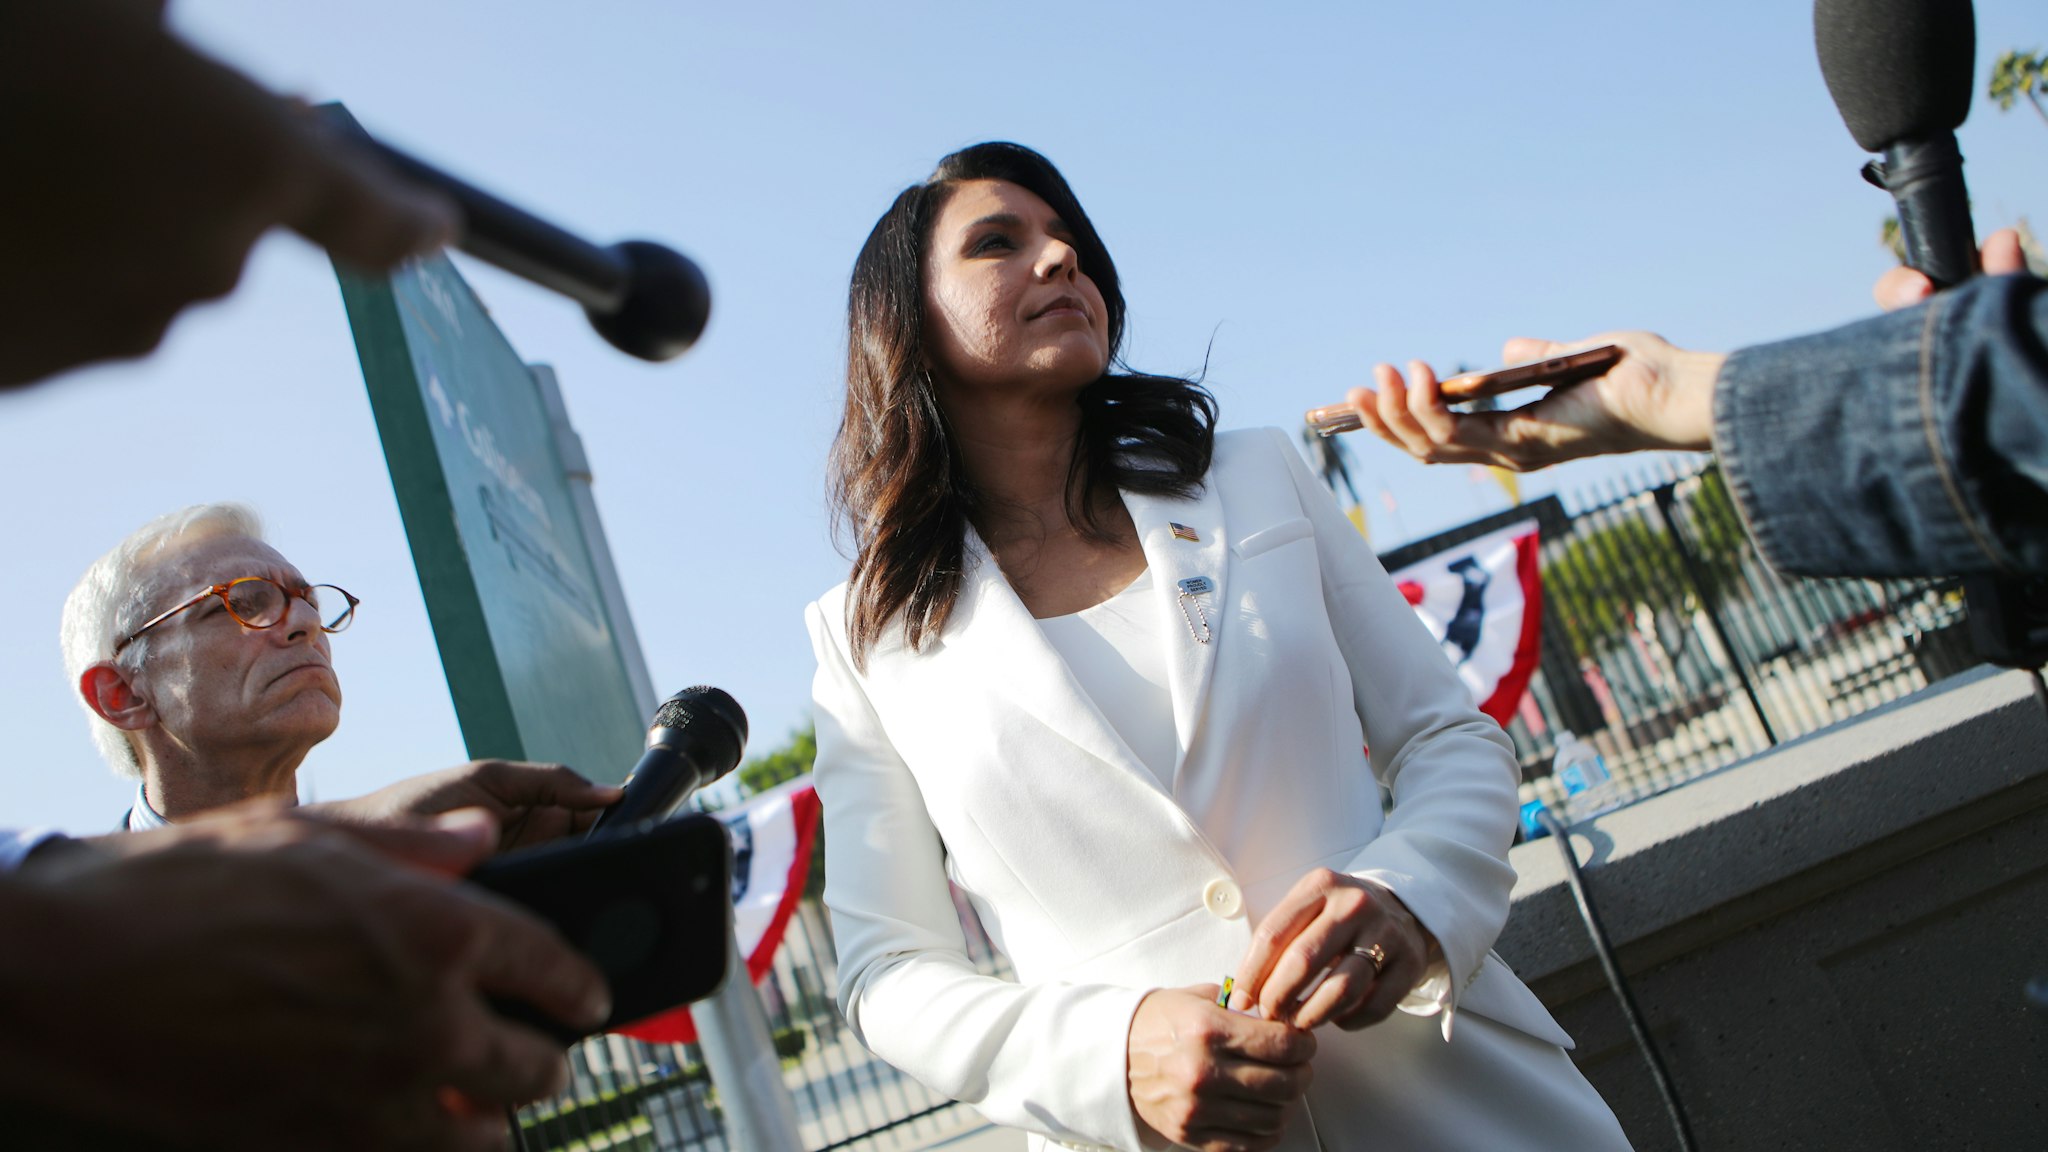 LOS ANGELES, CALIFORNIA - NOVEMBER 11: Democratic presidential candidate U.S. Rep. Tulsi Gabbard (D-HI) meets with reporters at the inaugural Veterans Day L.A. event held outside of the Los Angeles Memorial Coliseum on November 11, 2019 in Los Angeles, California. The stadium's historic torch was lit at the ceremony to mark the anniversary of the armistice which ended World War I in 1918. Gabbard is the first female combat veteran to run for the U.S. presidency. (Photo by Mario Tama/Getty Images)